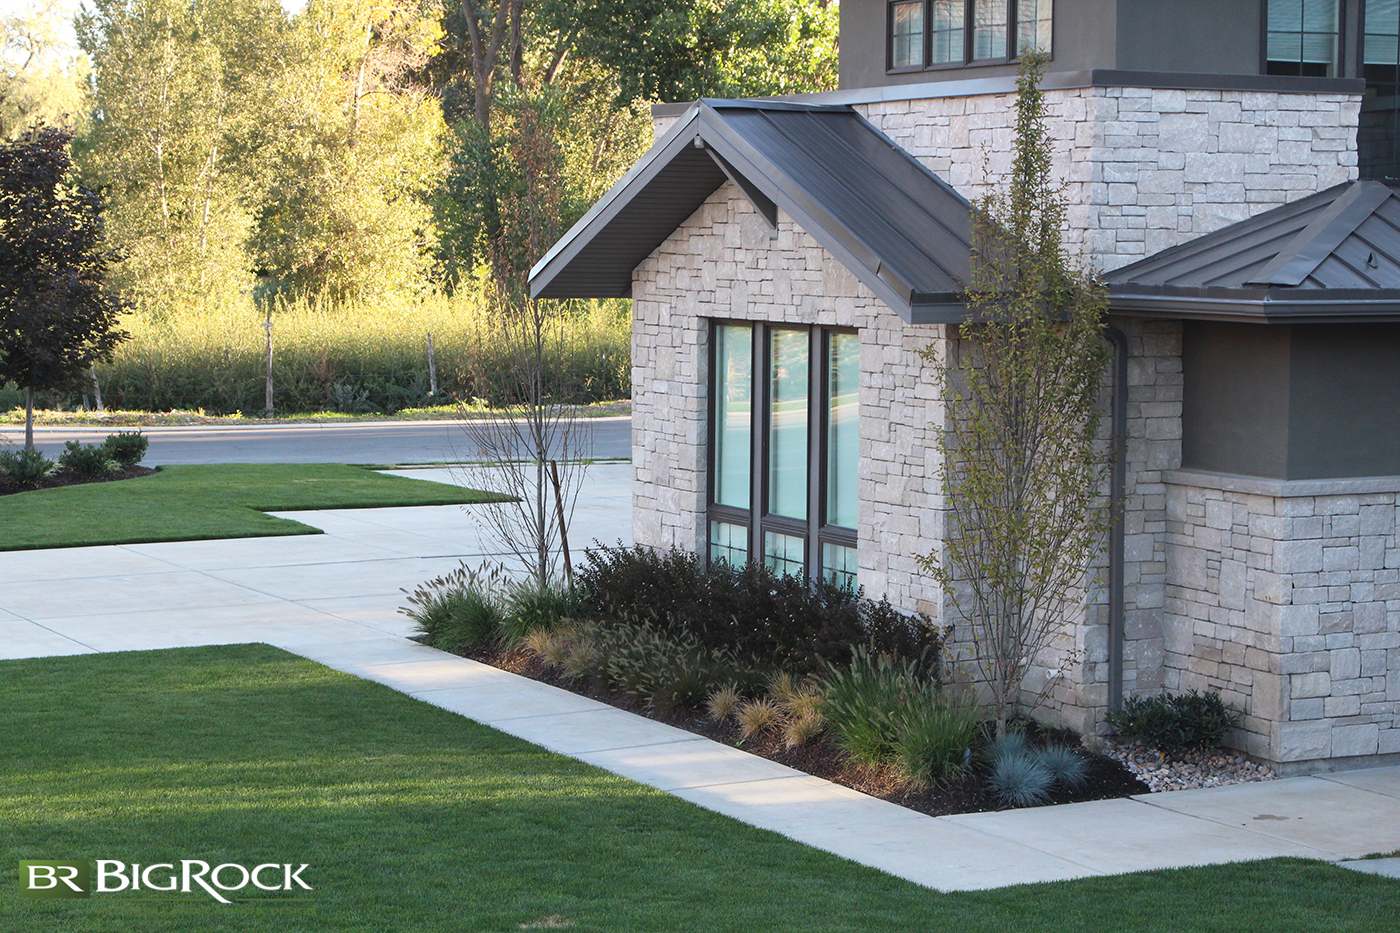 Sharp lines and clean sharp corners will add a contemporary design to your residential landscaping.